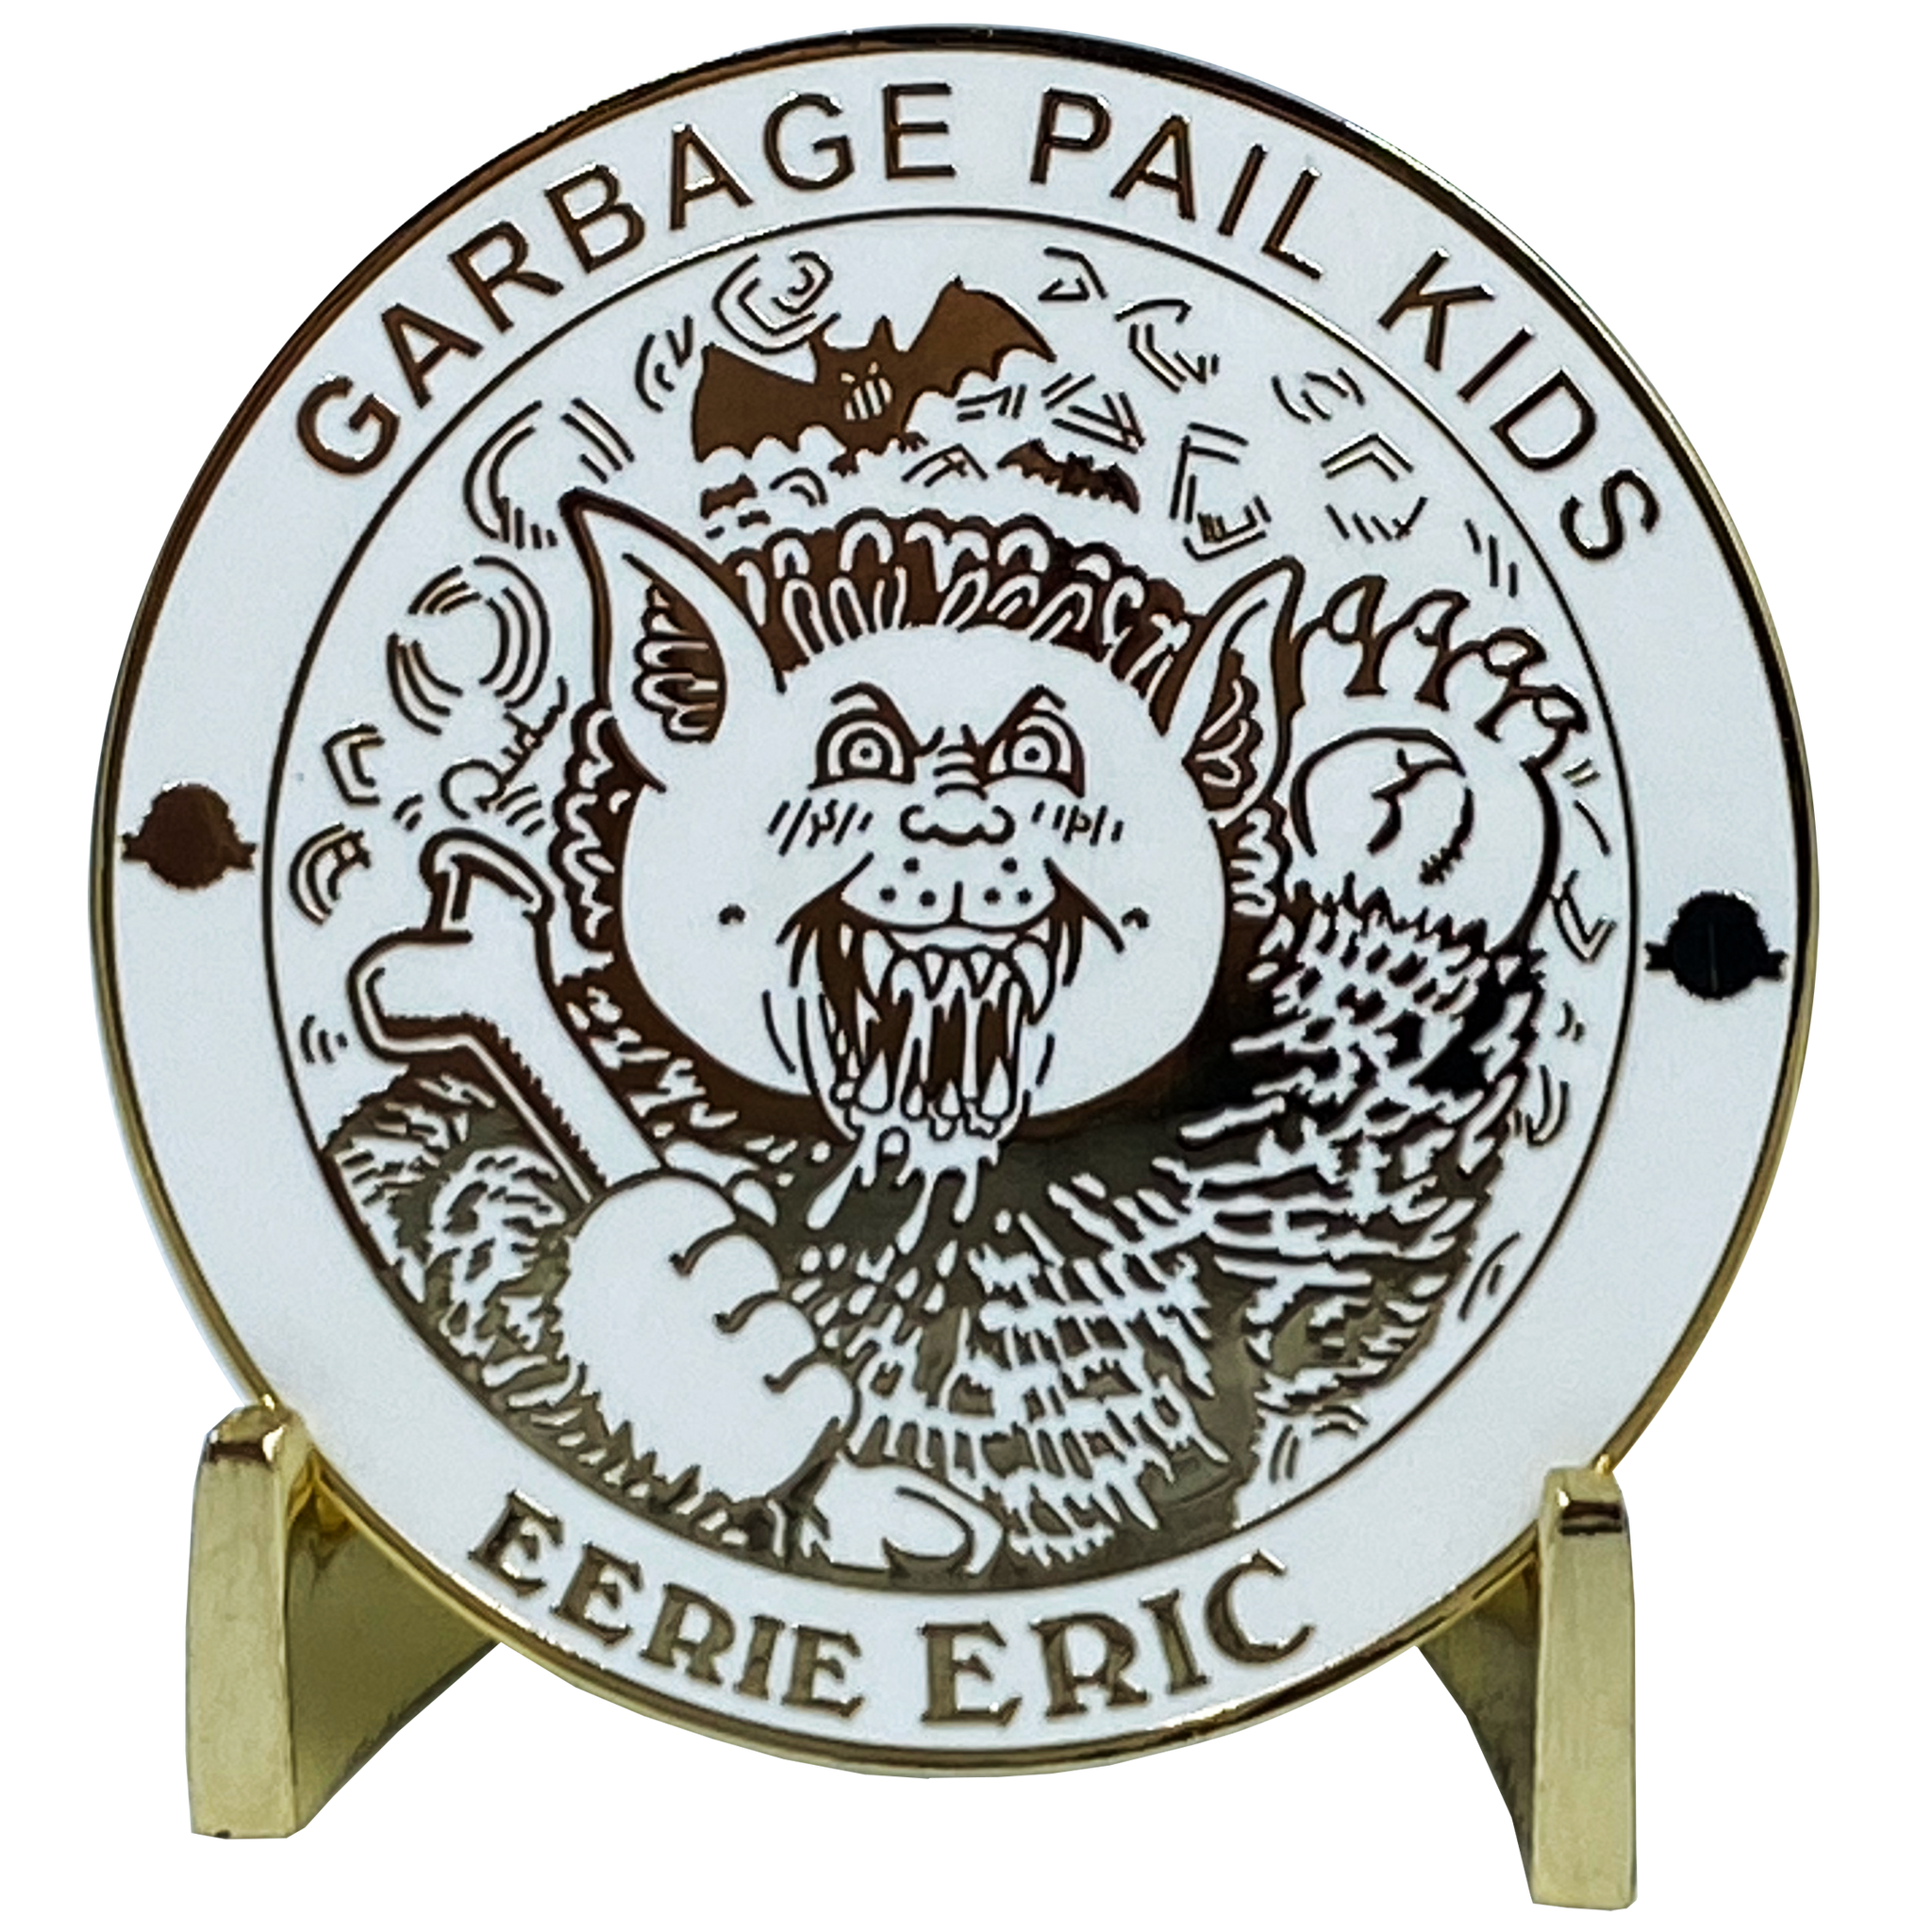 GPK-BB-002 EERIE ERIC Topps Officially Licensed David Gross Artist Collaboration GPK Challenge Coin Garbage Pail Kids